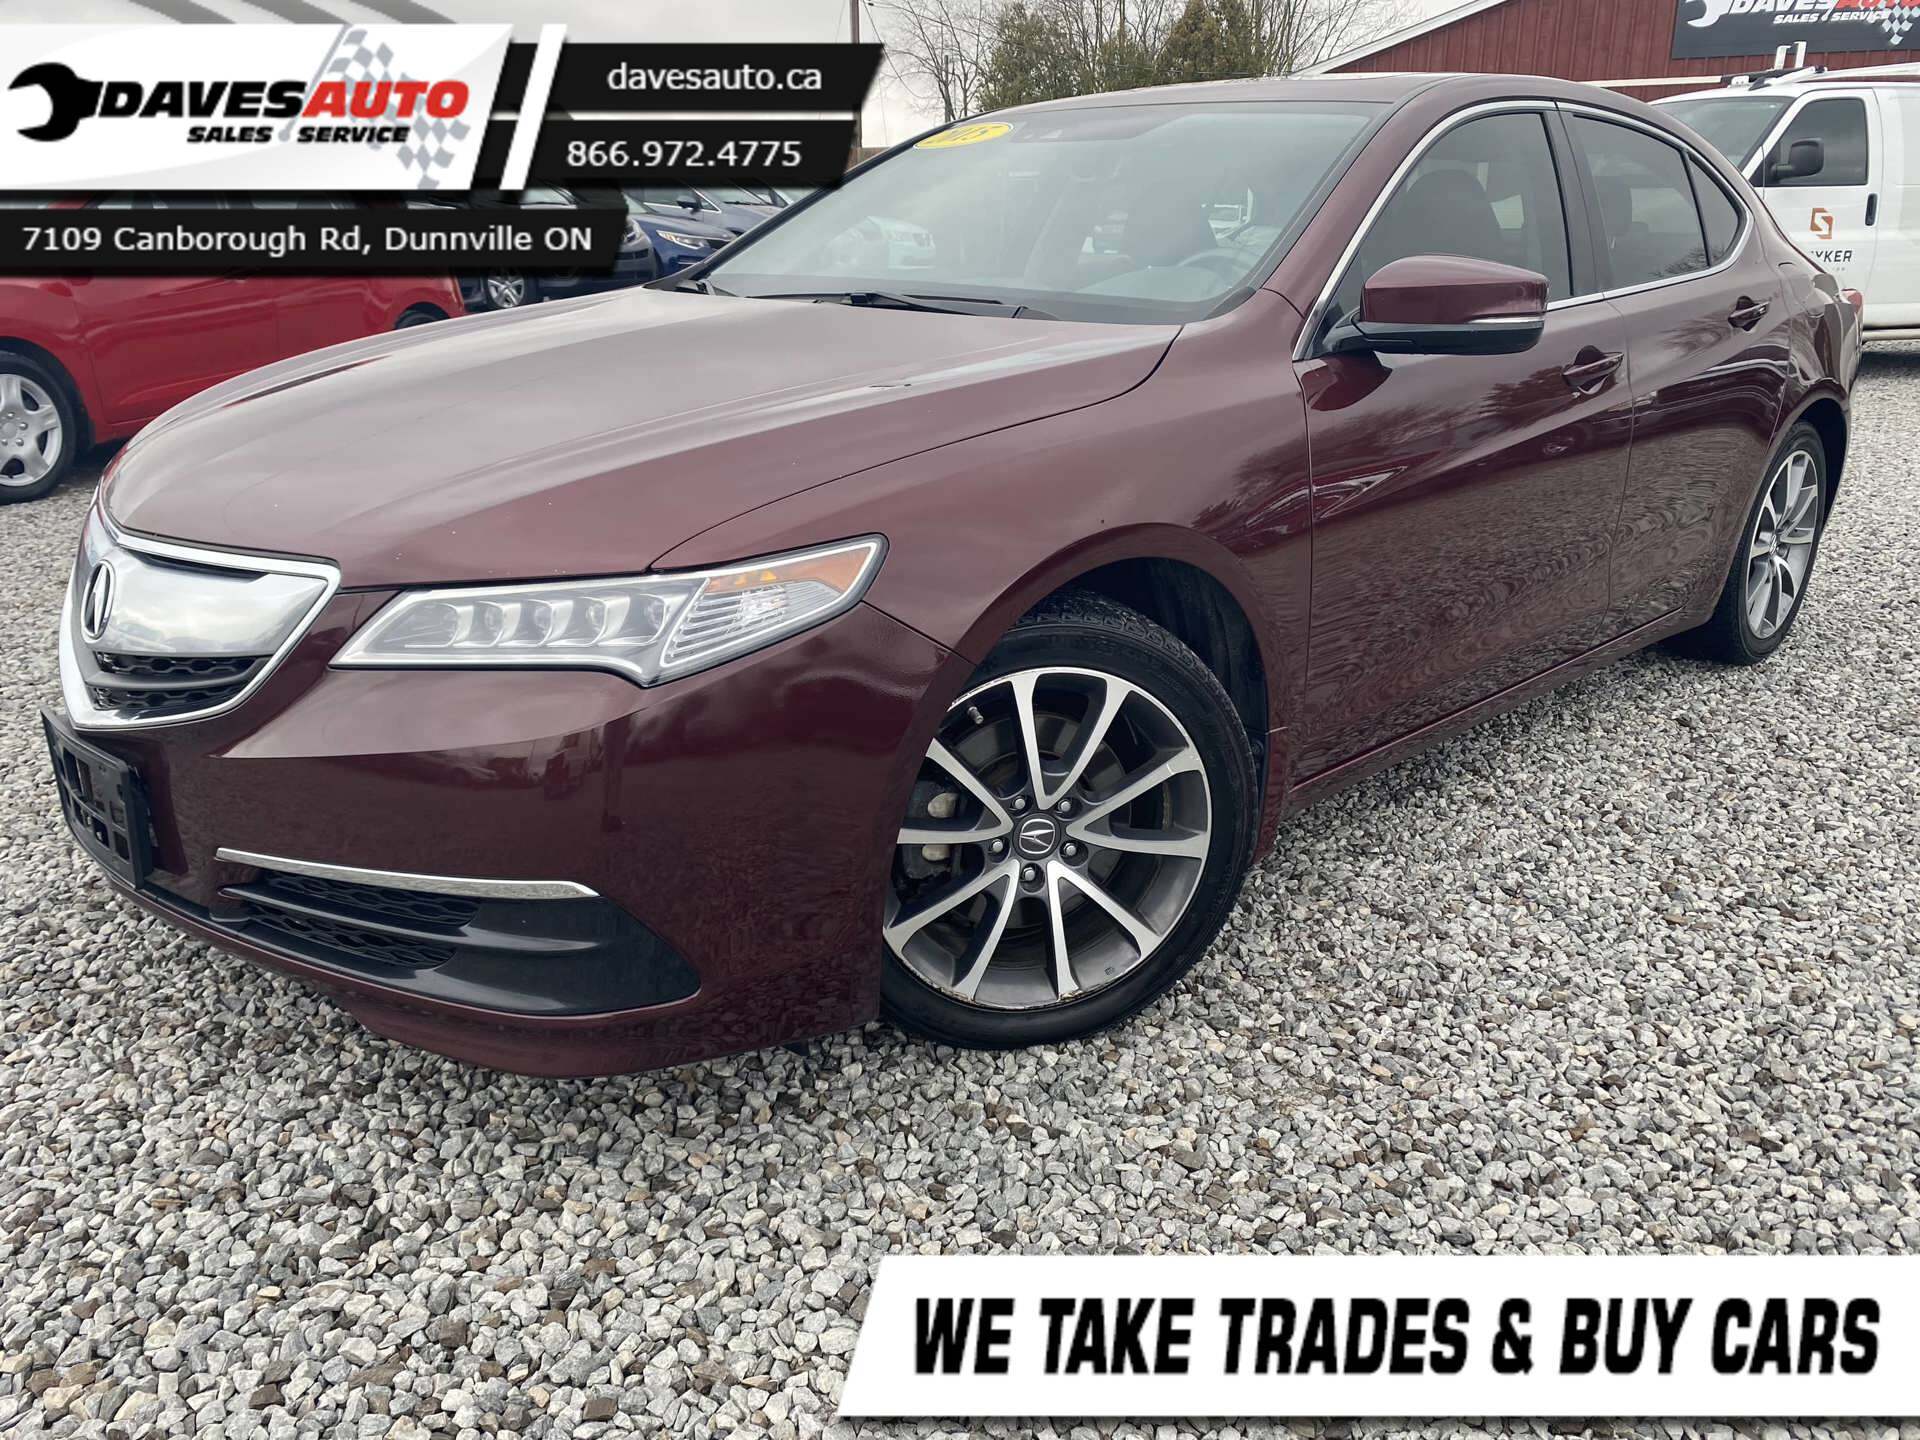 2015 Acura TLX V6 TECH SH-AWD w/Technology Package